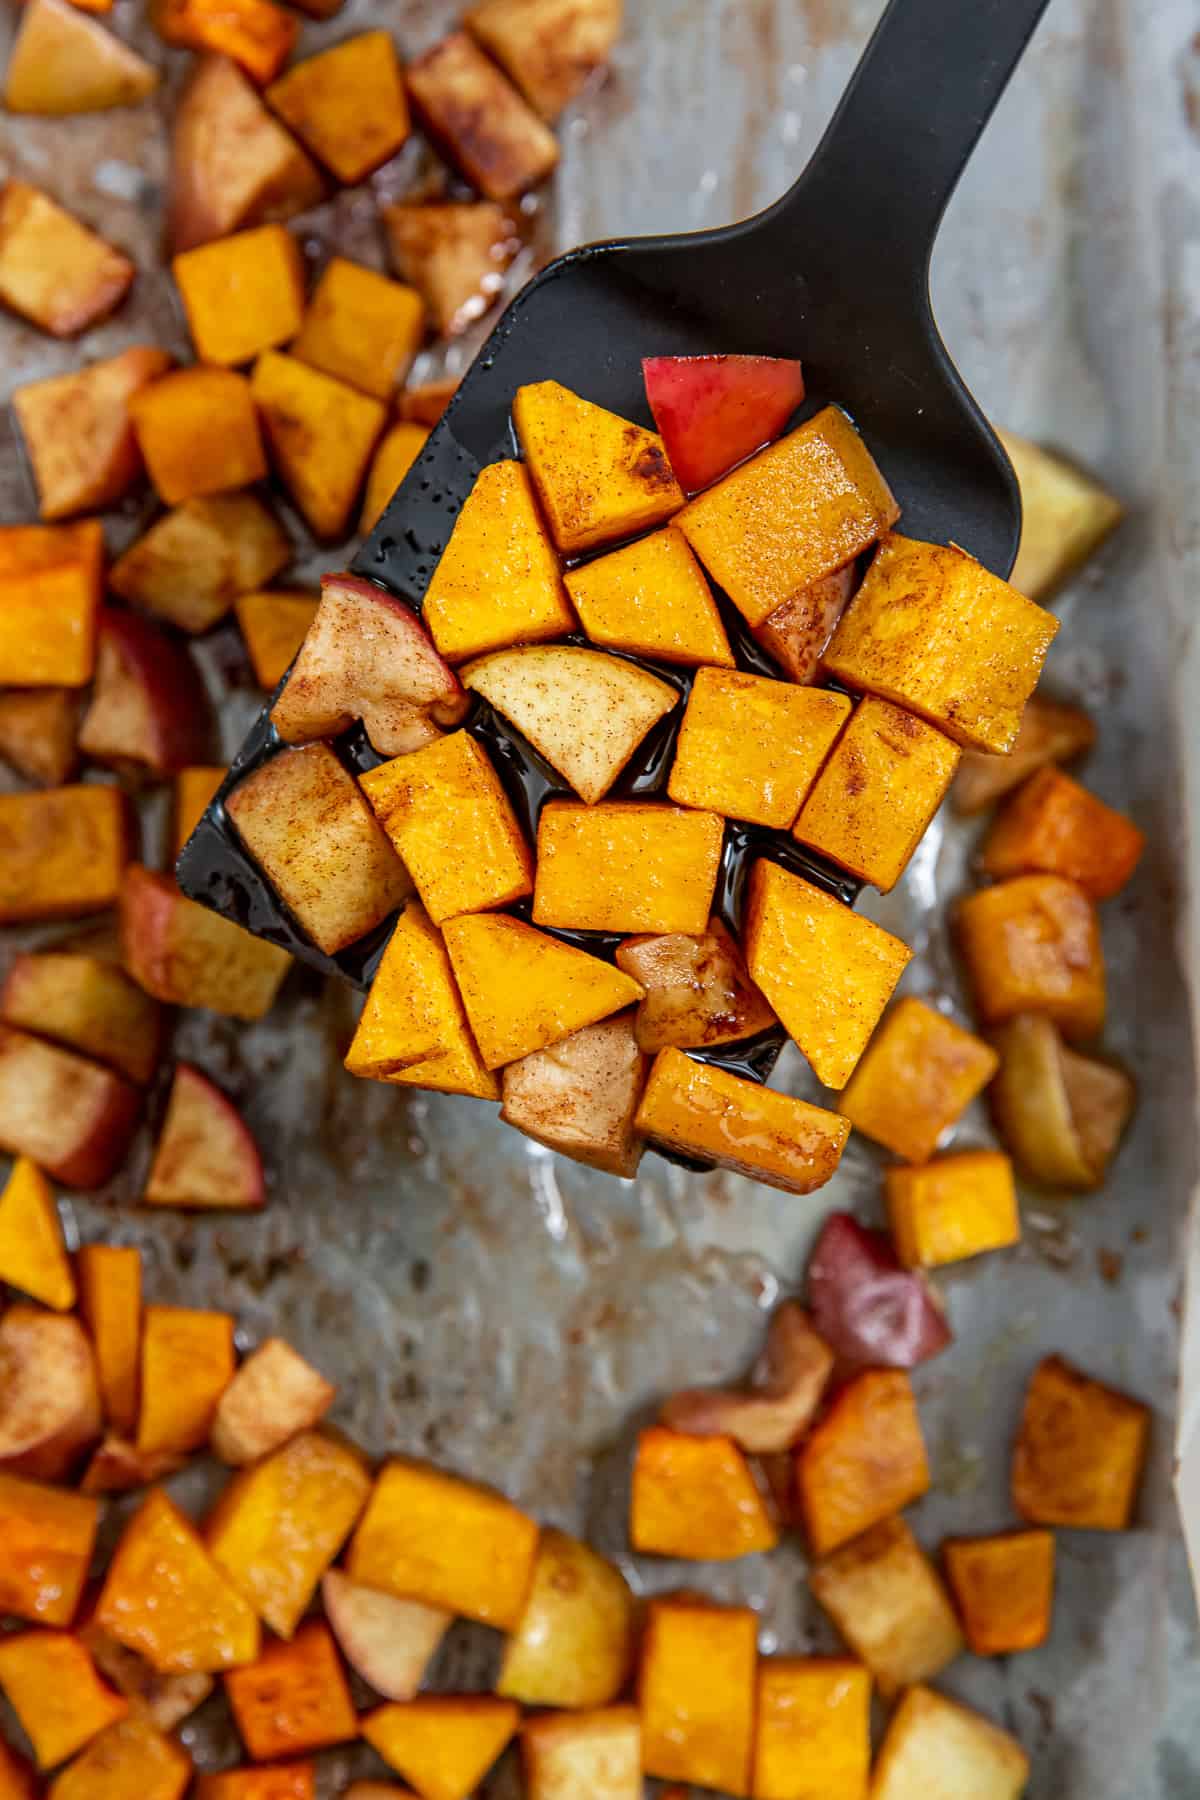 A spatula lifts roasted butternut squash and apples from a baking sheet.